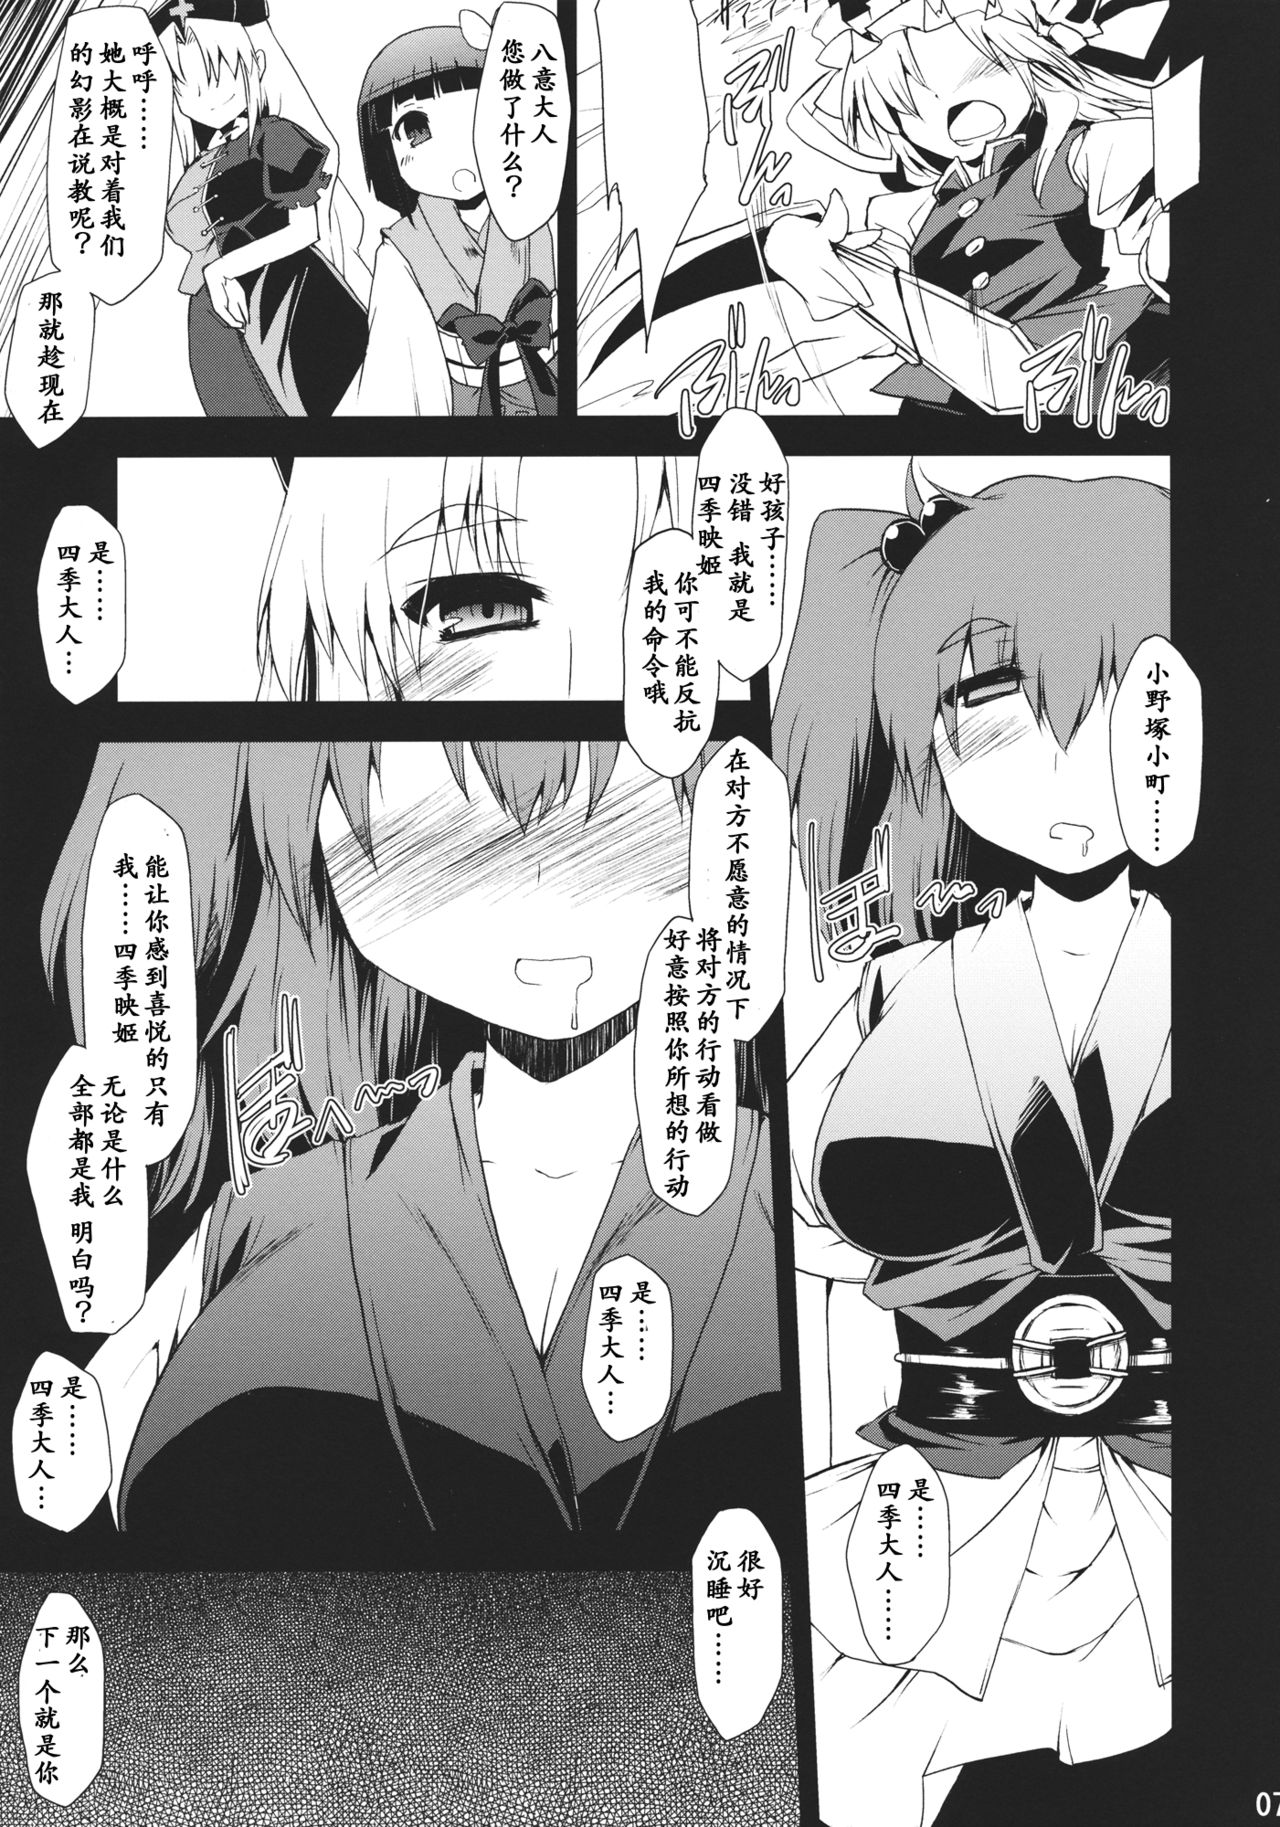 (C78) [Include (Foolest)] Saimin Ihen 5 ~Blind Justice~ (Touhou Project) [Chinese] [靴下汉化组] (C78) [IncluDe (ふぅりすと)] 催眠異変 伍 ~Blind Justice~ (東方Project) [中国翻訳]